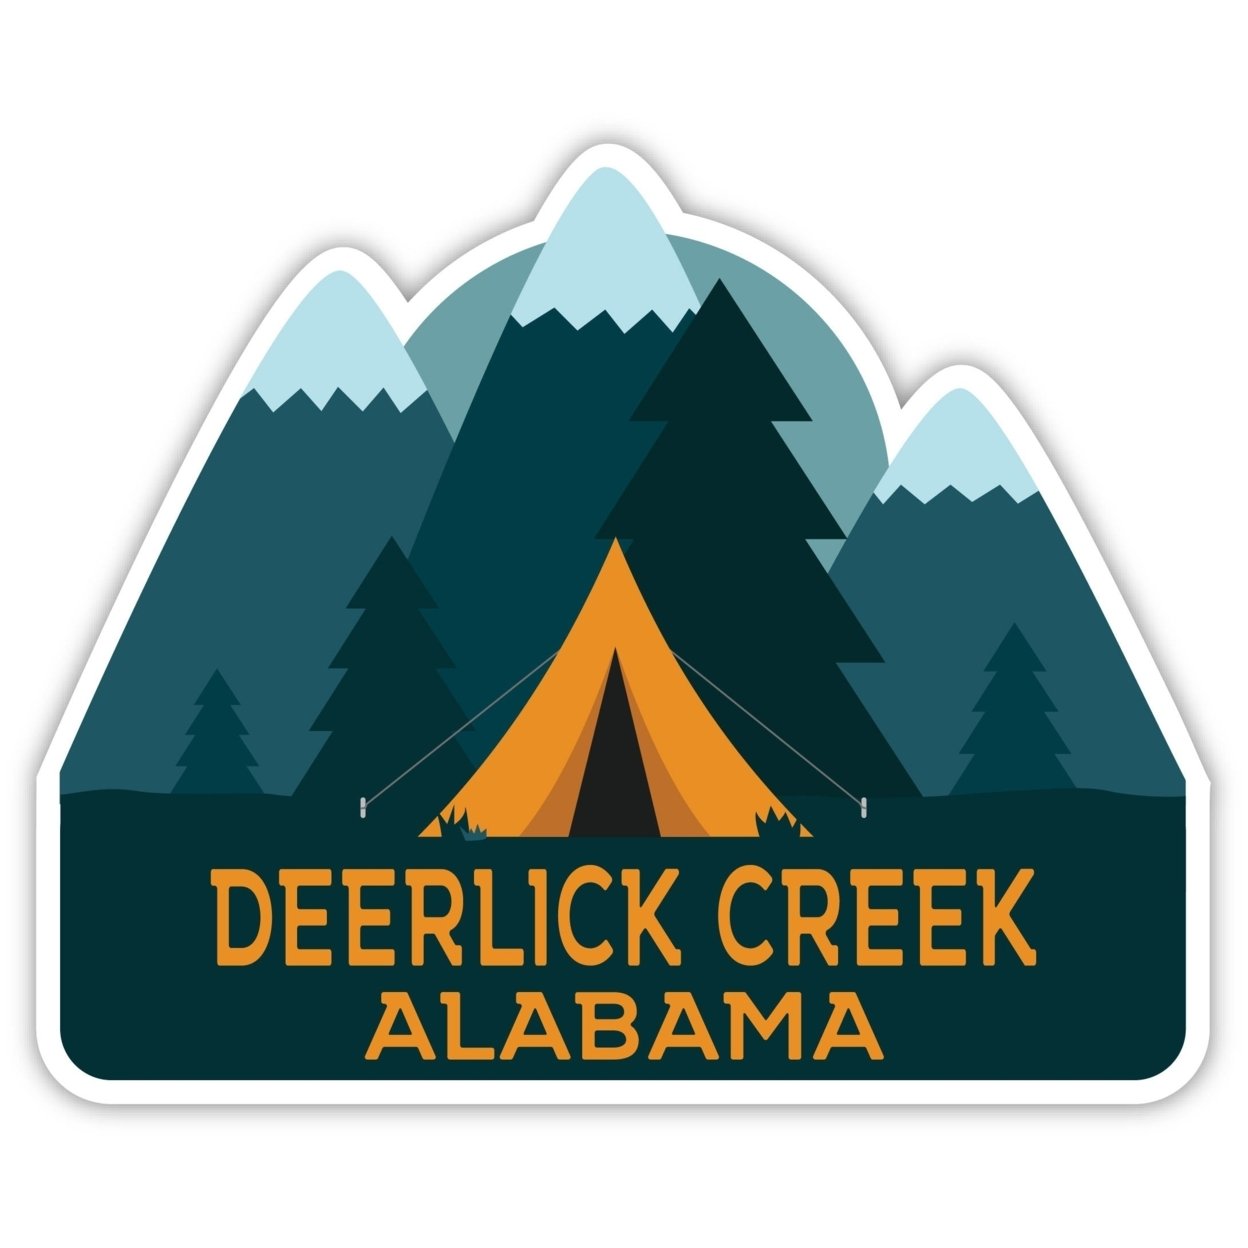 Deerlick Creek Alabama Souvenir Decorative Stickers (Choose Theme And Size) - Single Unit, 10-Inch, Great Outdoors